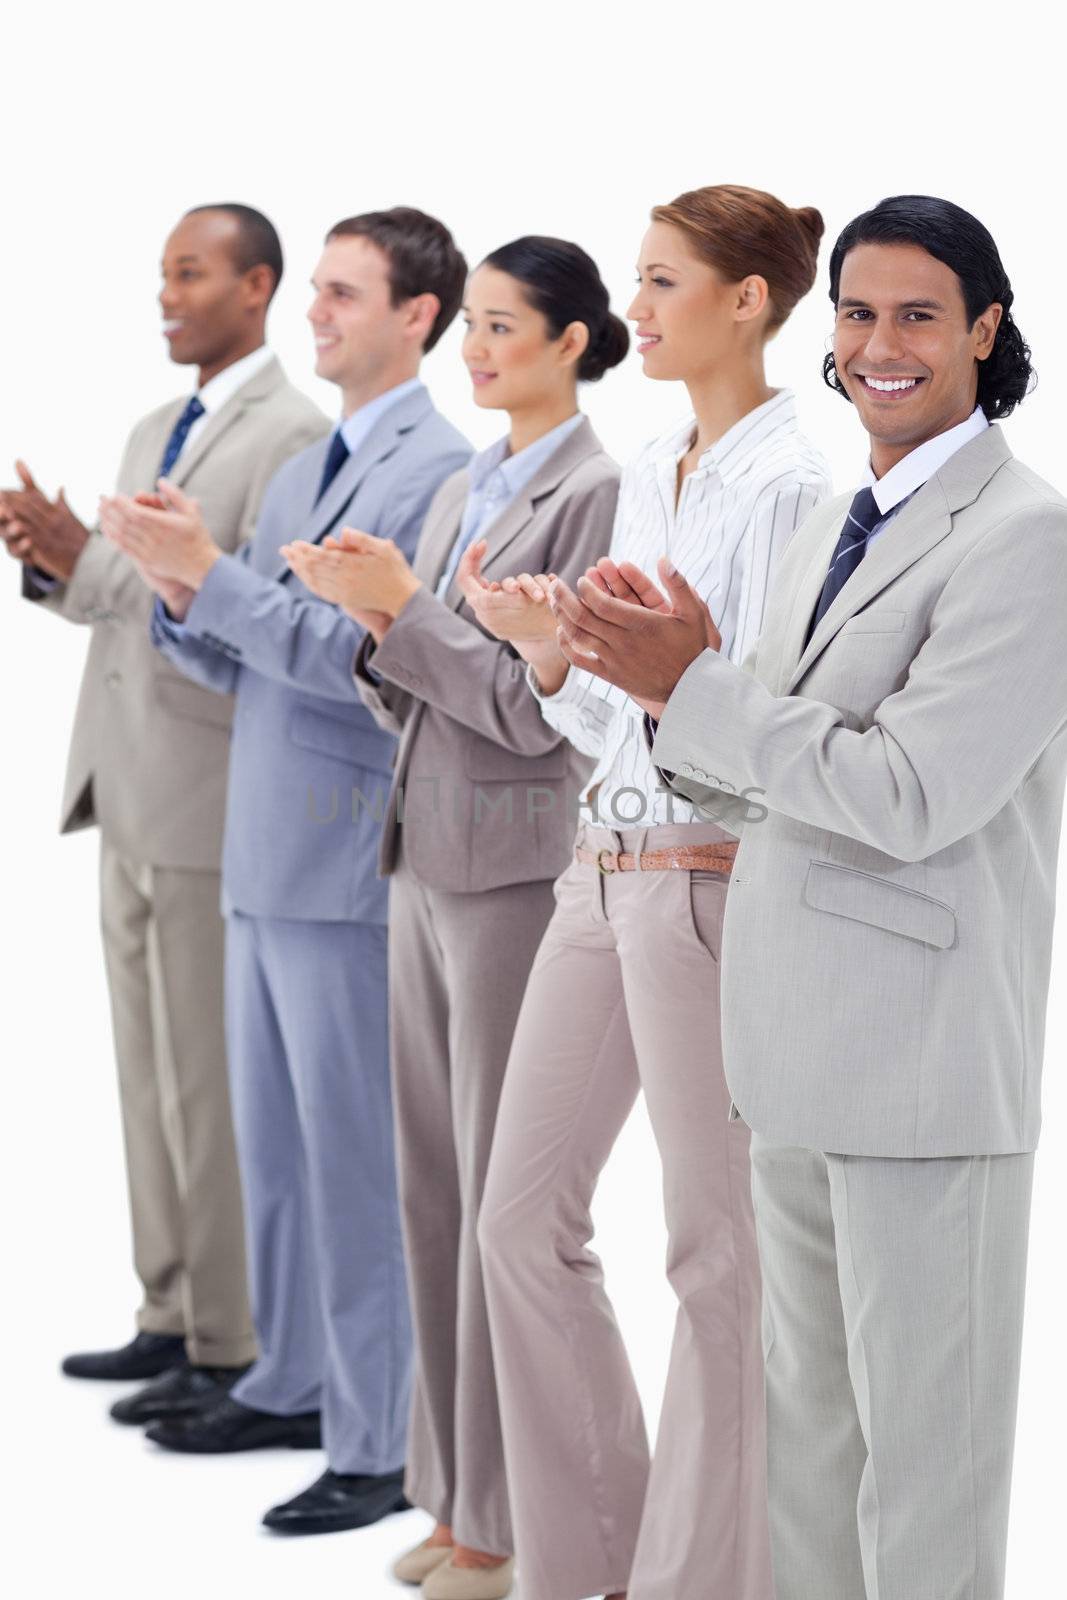 Business team smiling and applauding  by Wavebreakmedia